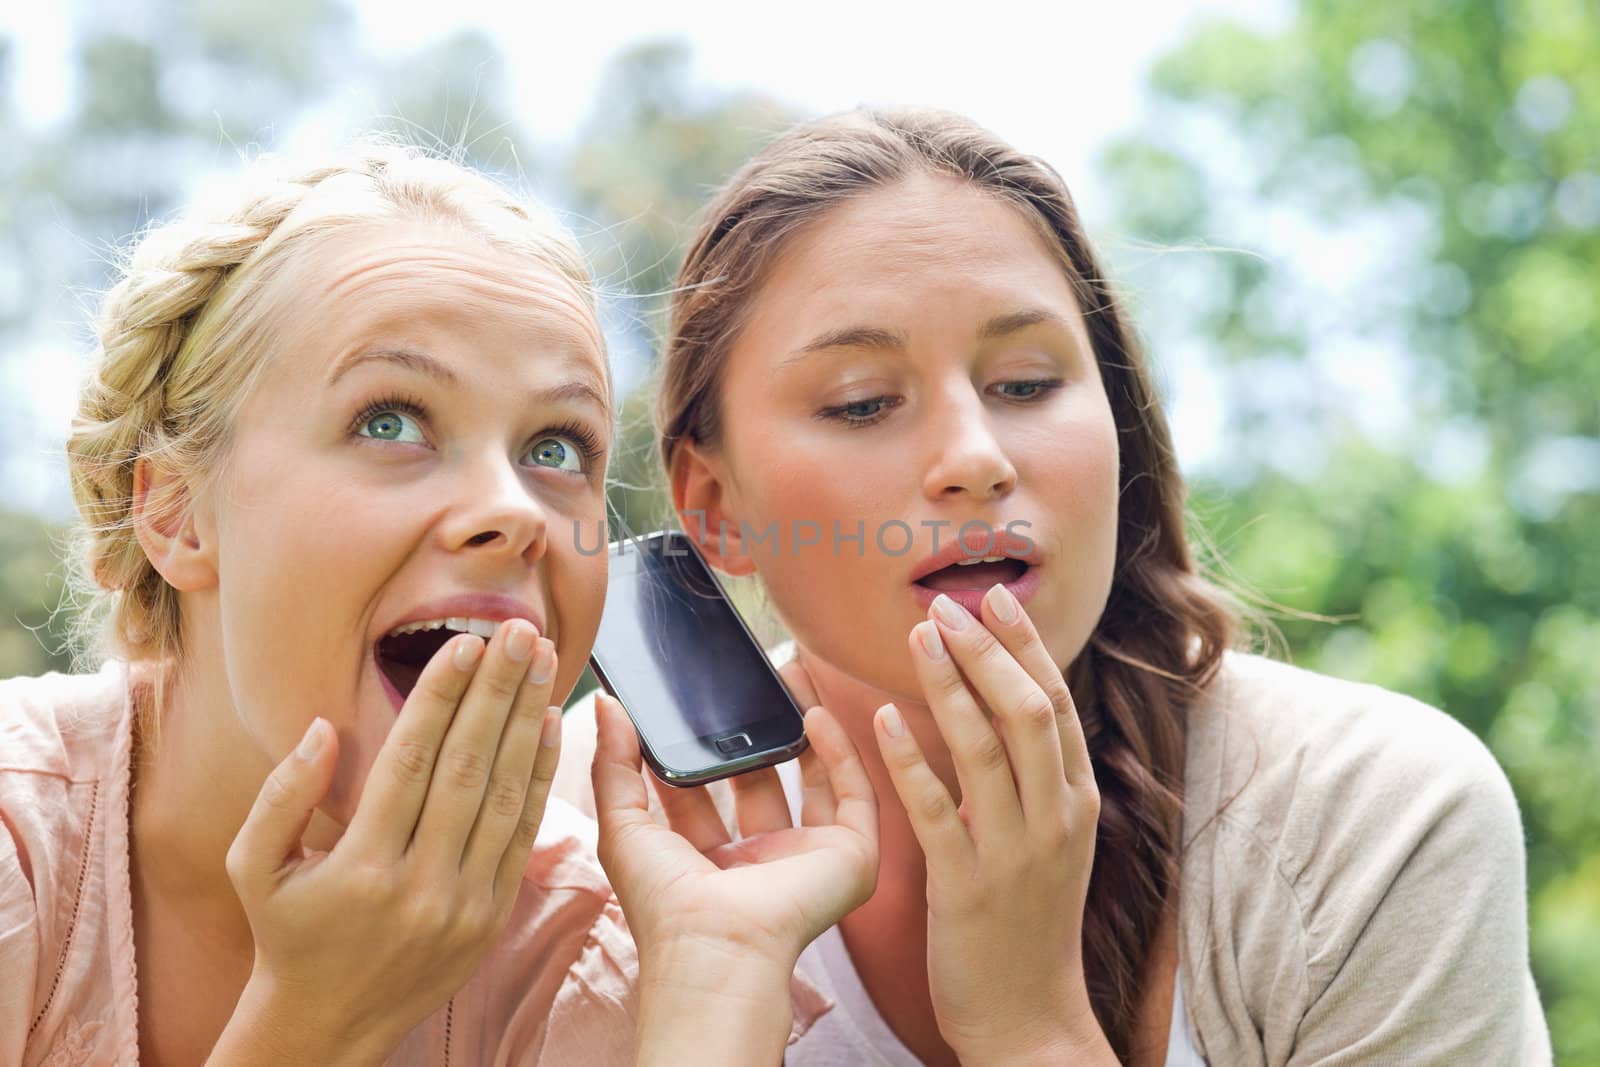 Curious female friends listening to phone call in the park